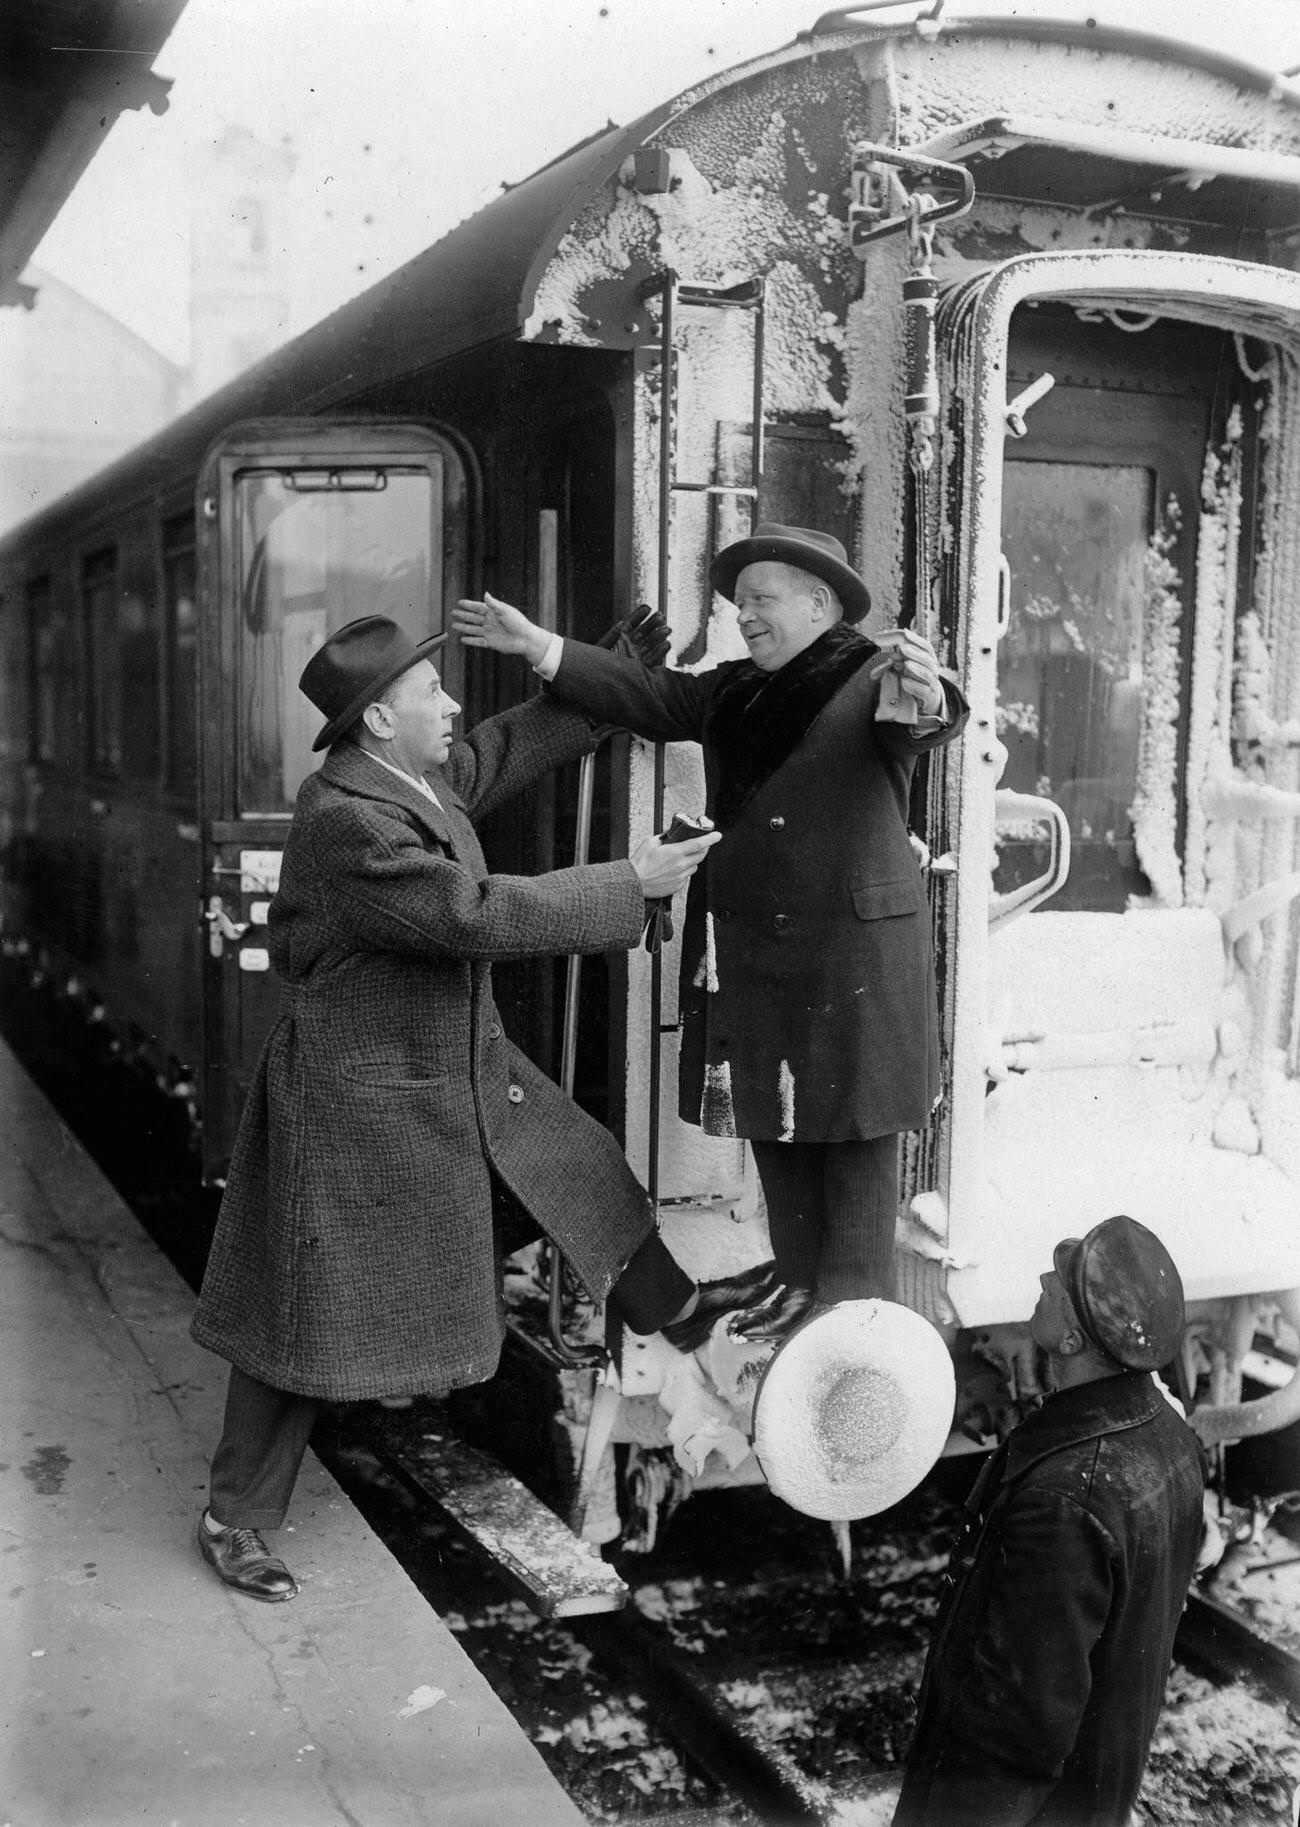 Pat & Patachon's Arrival at the Stettiner railway station in Berlin, 1931